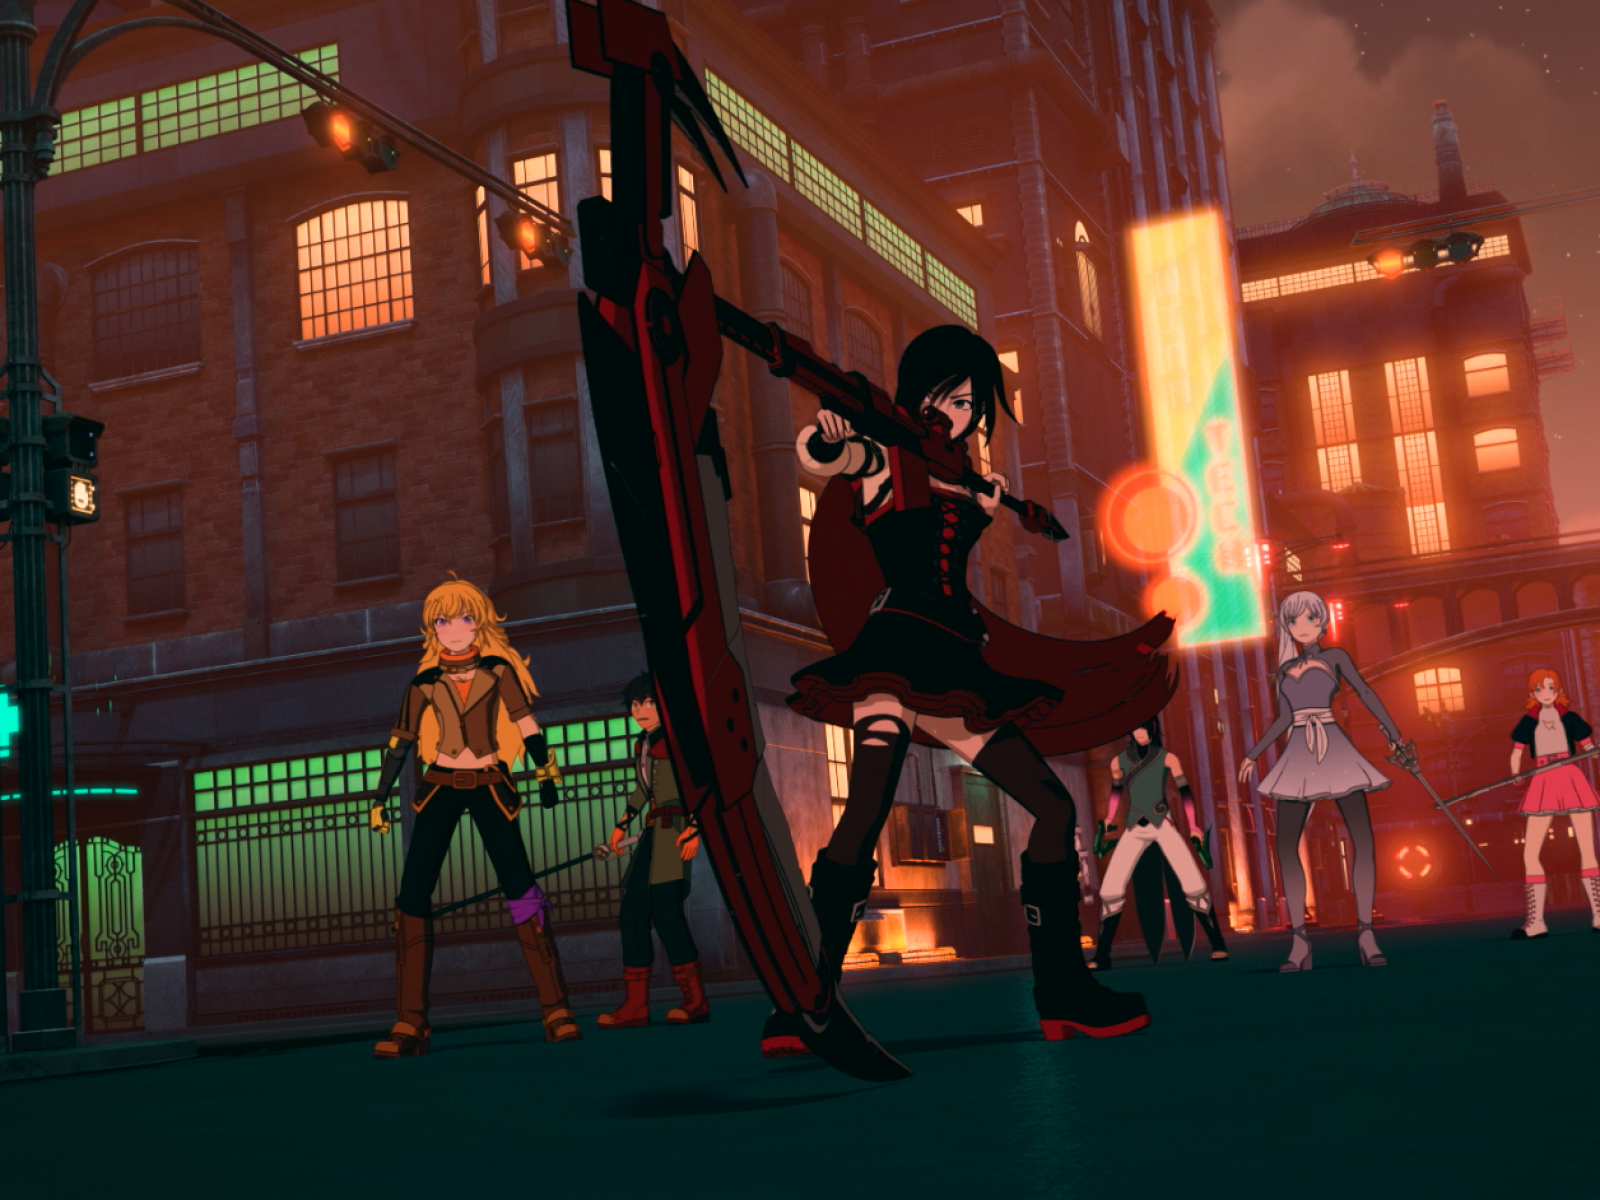 Rwby Writers Revisit Decisions Behind Volume 6 The Rise Of Ruby Rose And Tease Volume 7